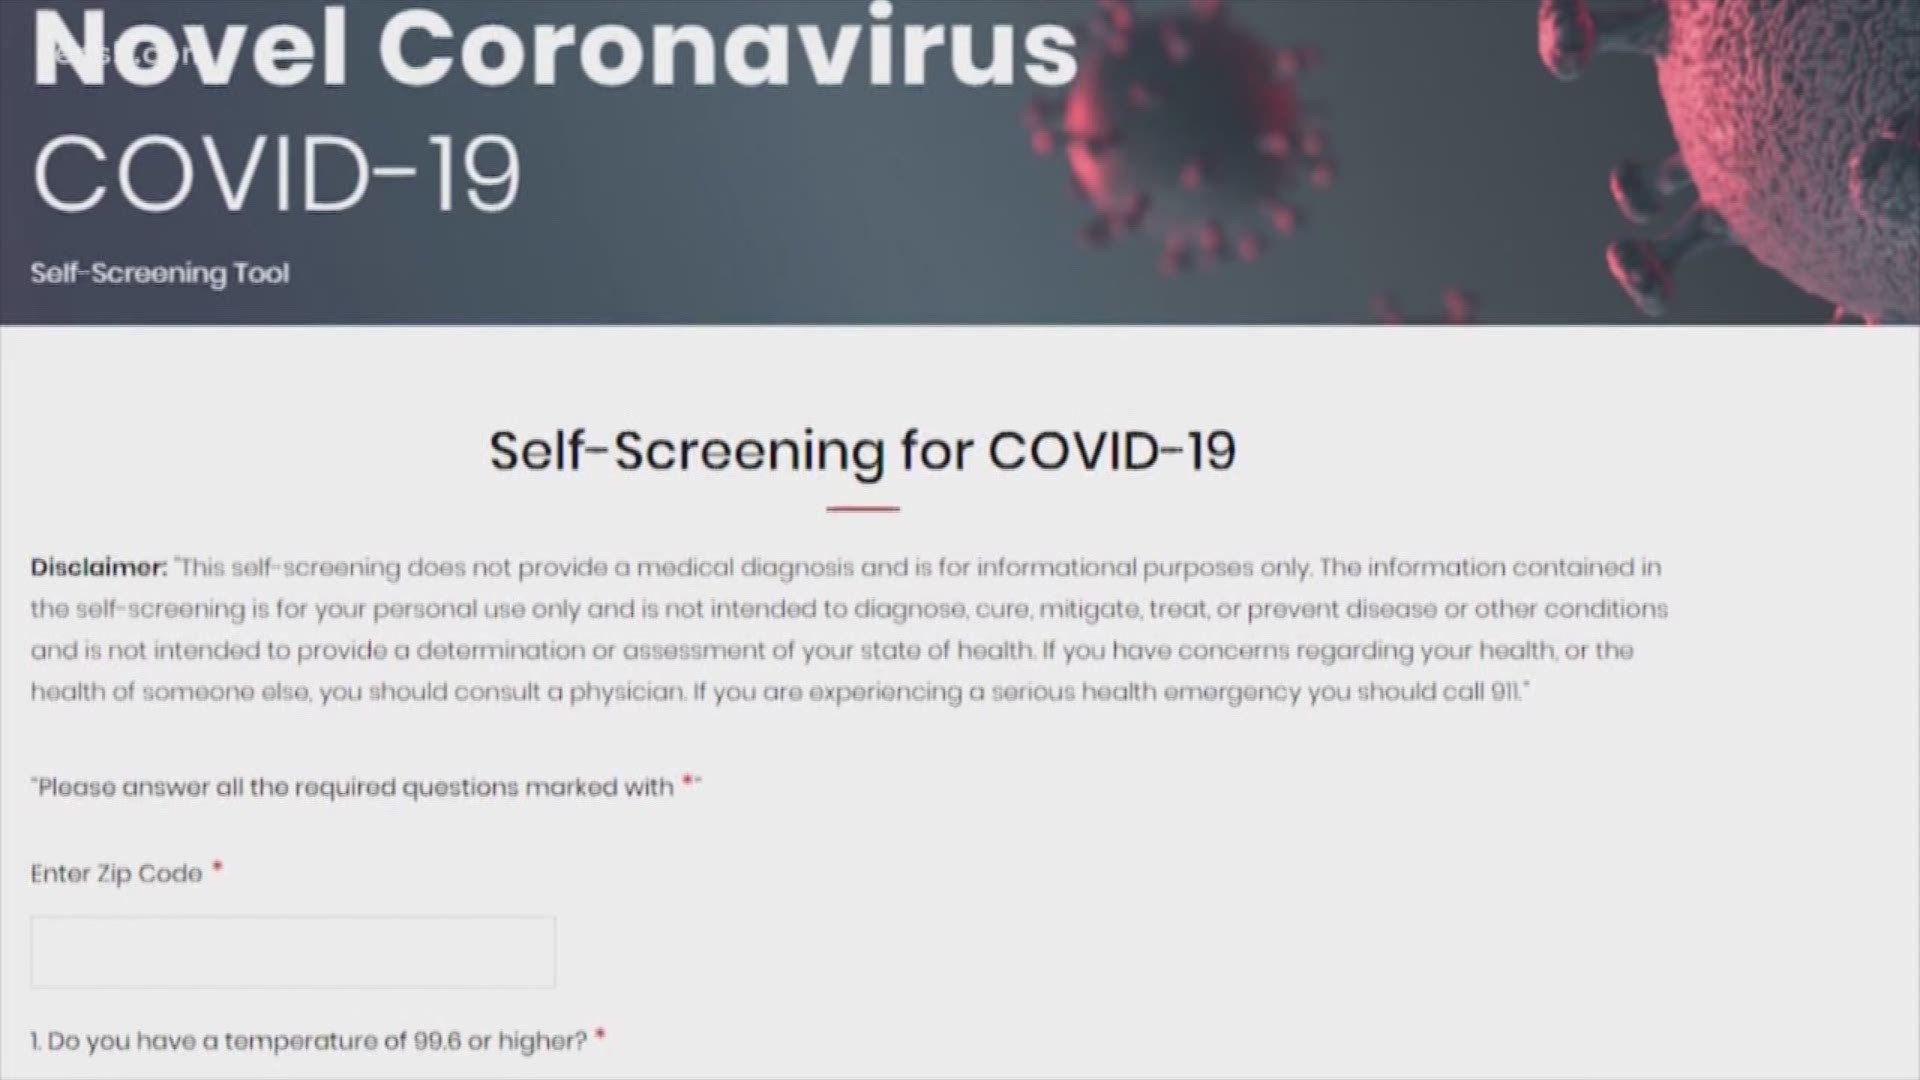 You no longer need a doctor's note to get a coronavirus test in San Antonio, but you do need to use the city's online screening tool and make an appointment.